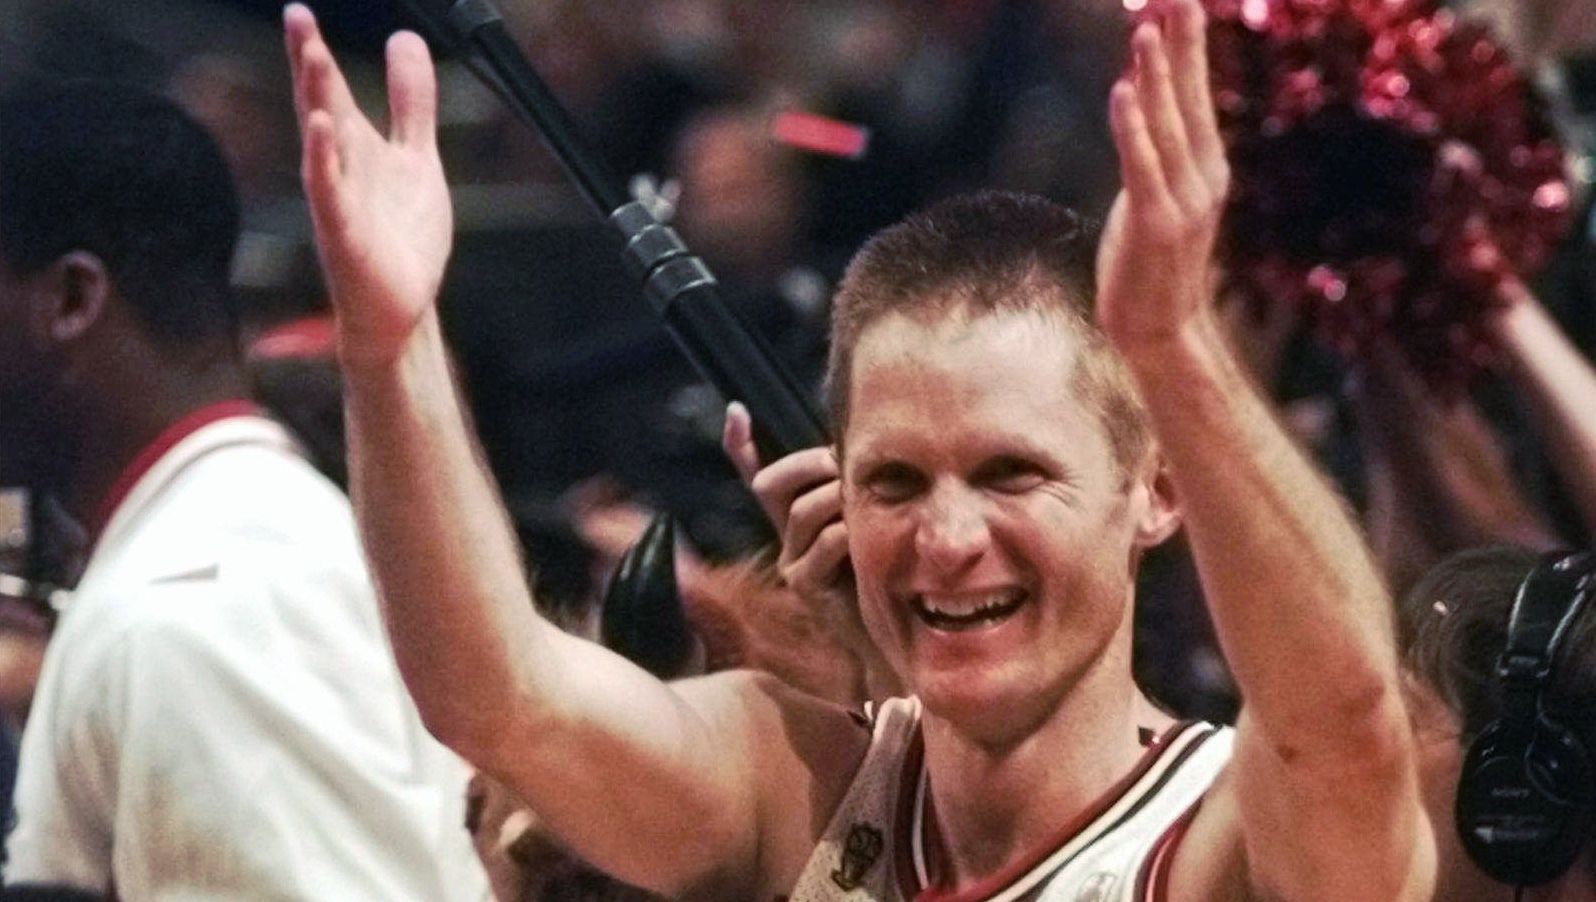 The Last Dance': Steve Kerr's shorts from 1997 NBA Finals up for auction -  Deseret News